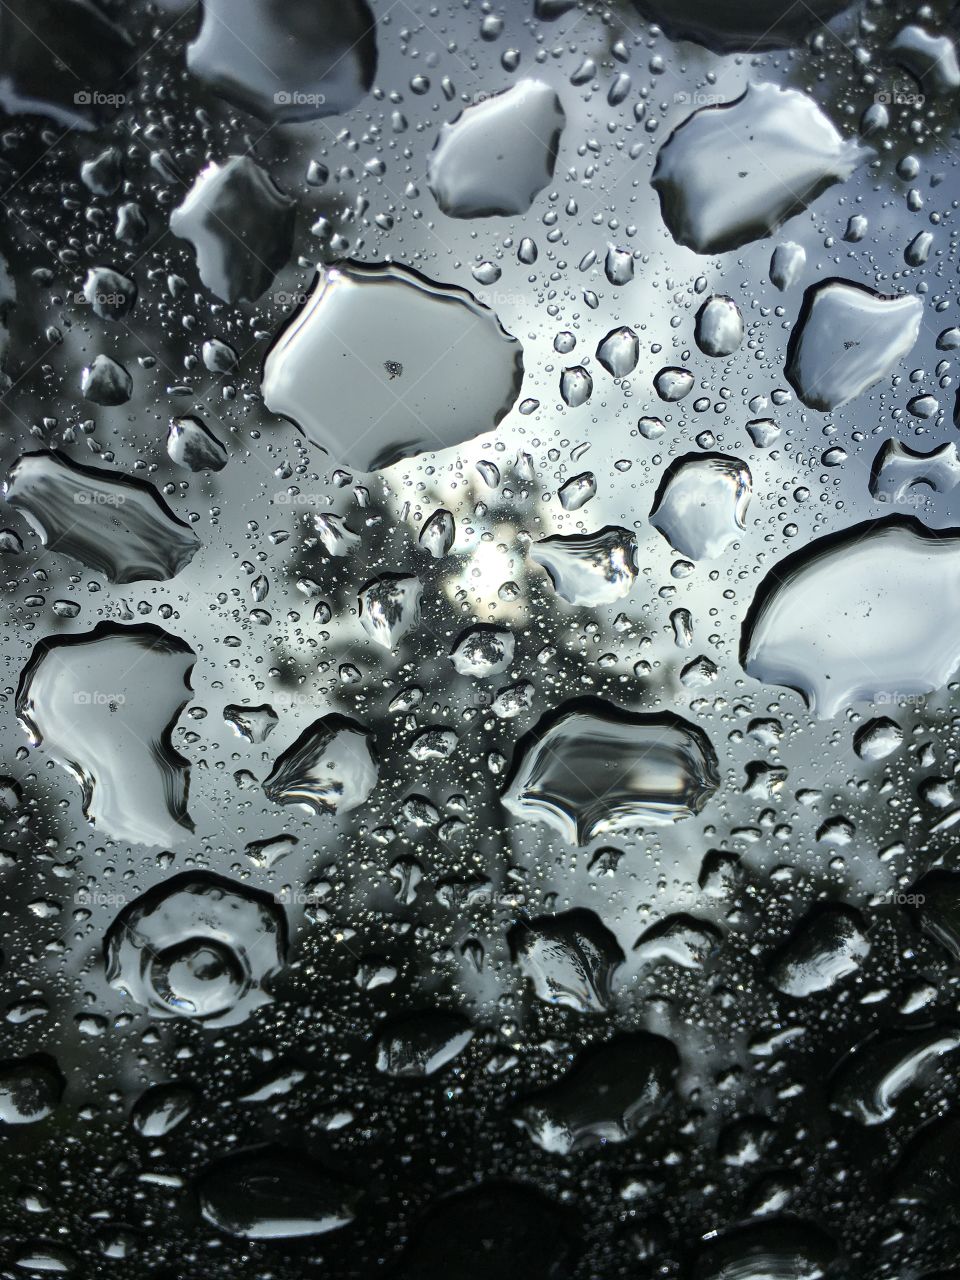 Raindrops on a sunroof, Pineywoods, rainstorm, waiting out a rainstorm in the car 